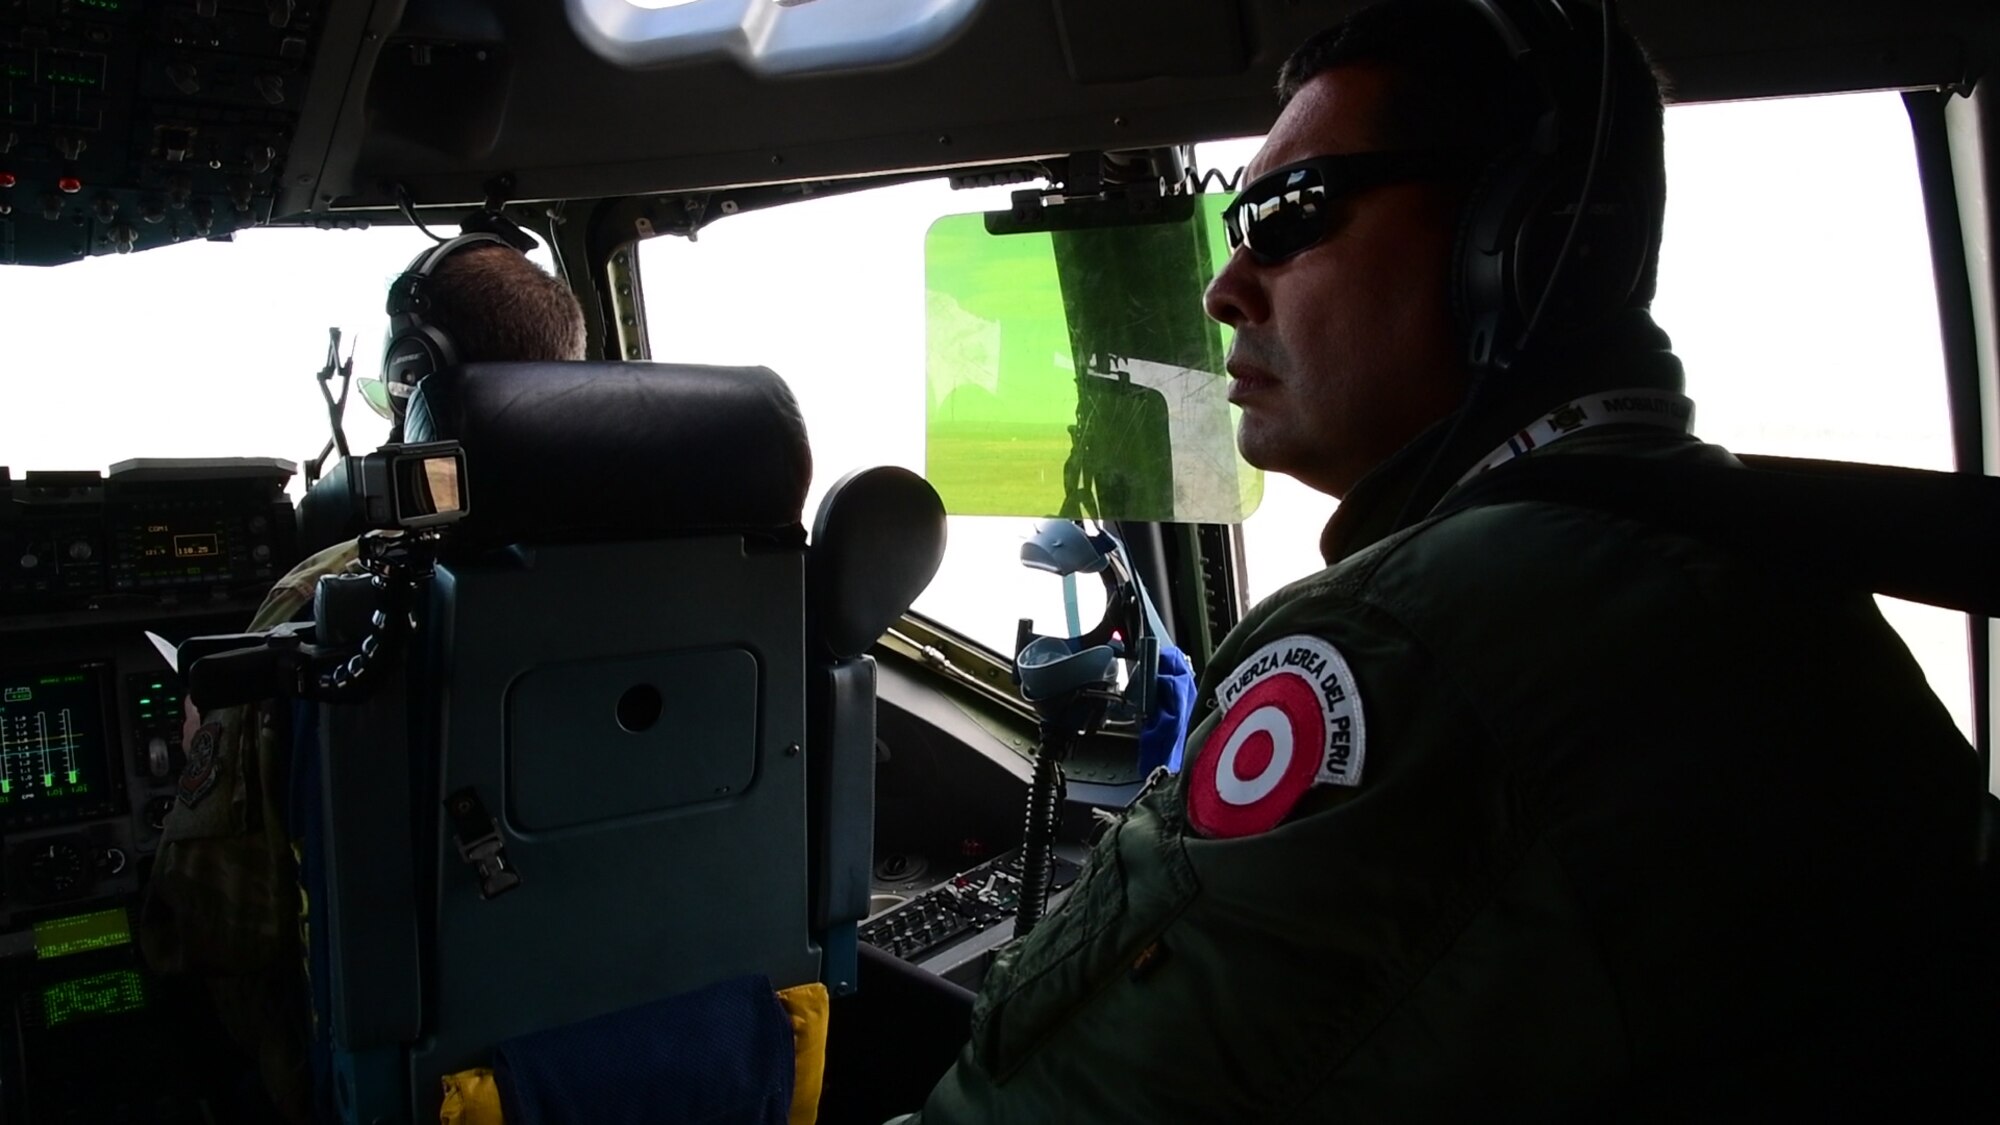 A Peruvian military member looks on as pilots from the 3rd Airlift Squadron fly the C-17 Globemaster III Sept. 23, 2019, at Fairchild AFB, Wash., in support of exercise Mobility Guardian 2019. Exercise Mobility Guardian is Air Mobility Command's premier large-scale mobility exercise. Through robust and relevant training, Mobility Guardian improves the readiness and capabilities of Mobility Airmen to deliver rapid global mobility and builds a more lethal and ready Air Force.(U.S. Air Force photo by Tech. Sgt. Esteban Esquivel).